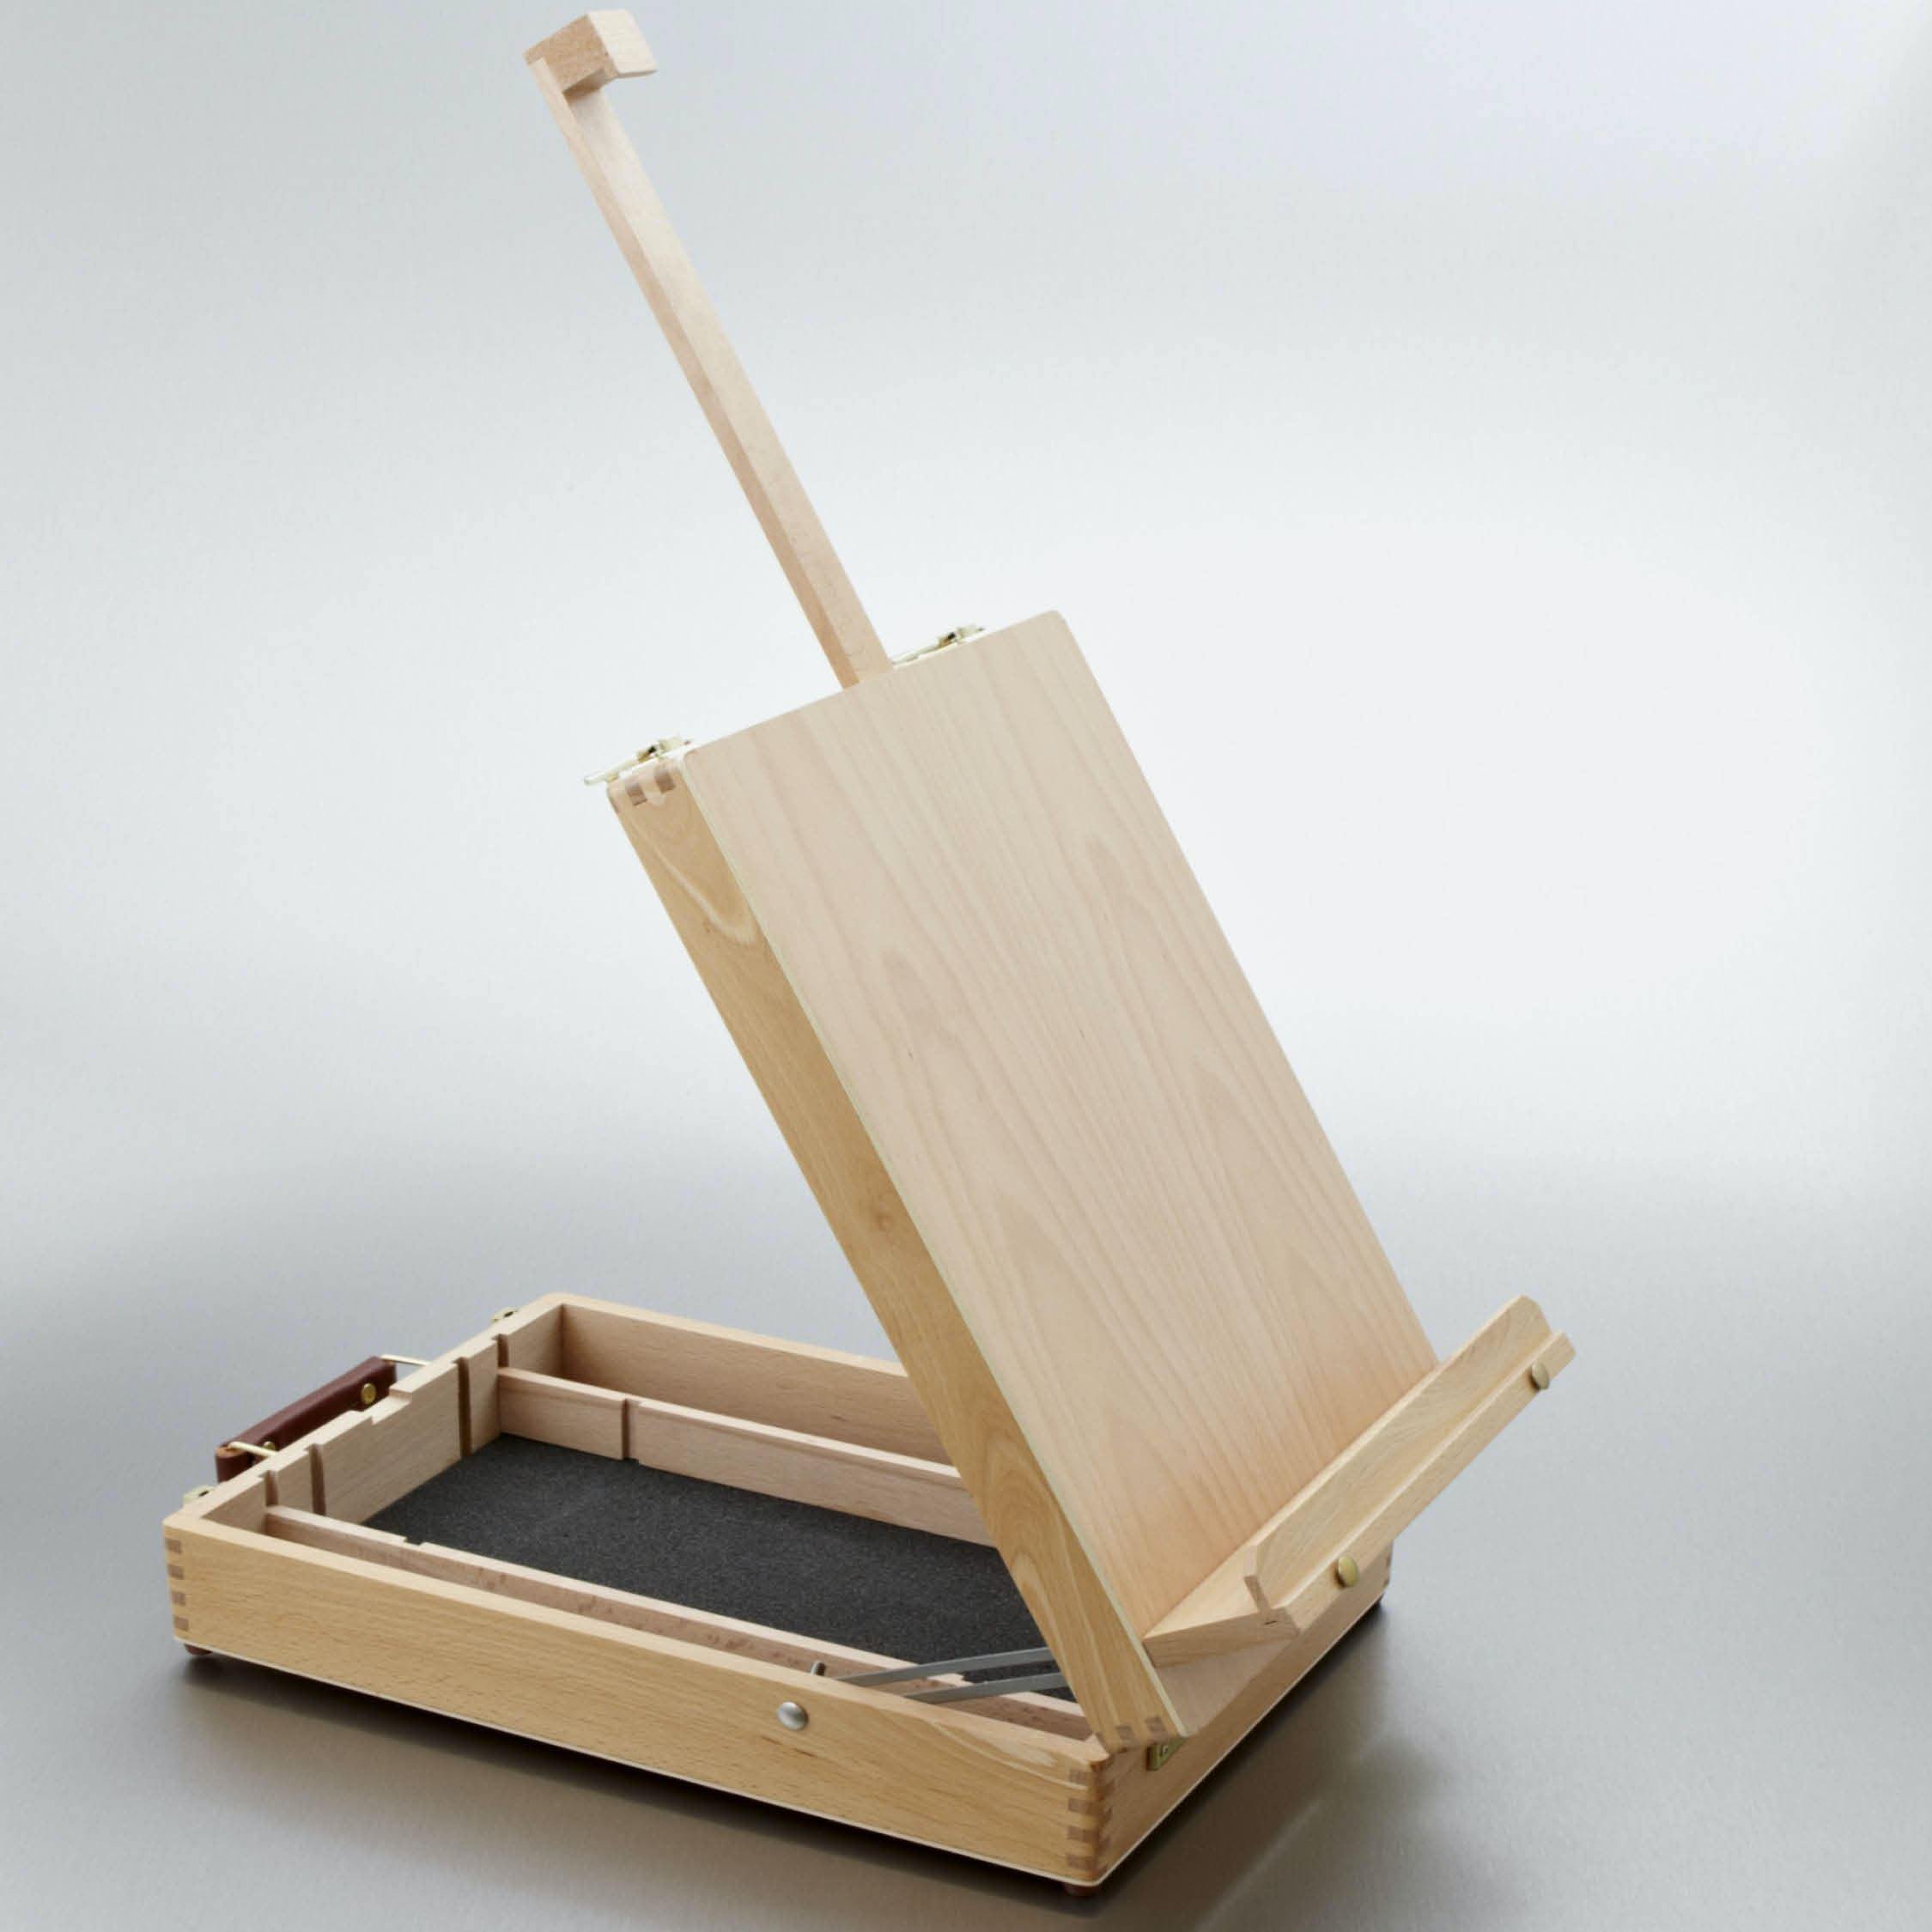  Daler-Rowney St. Paul's Easel - Wooden Easel Stand for